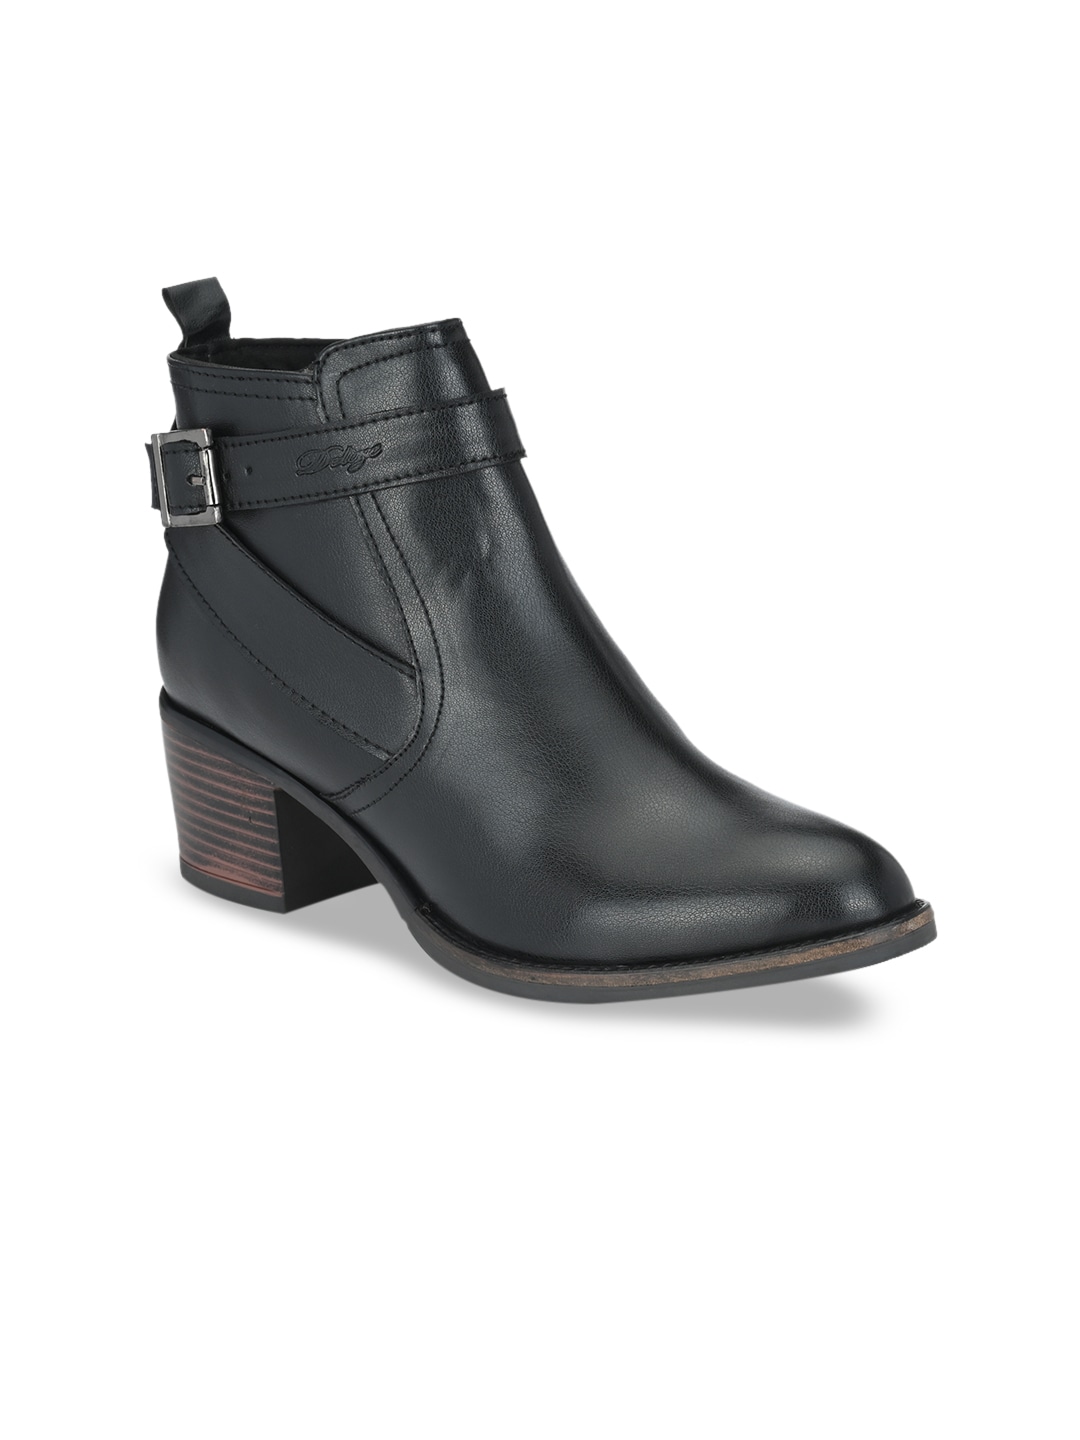 Delize Women Black Solid Mid-Top Chelsea Heeled Boots Price in India